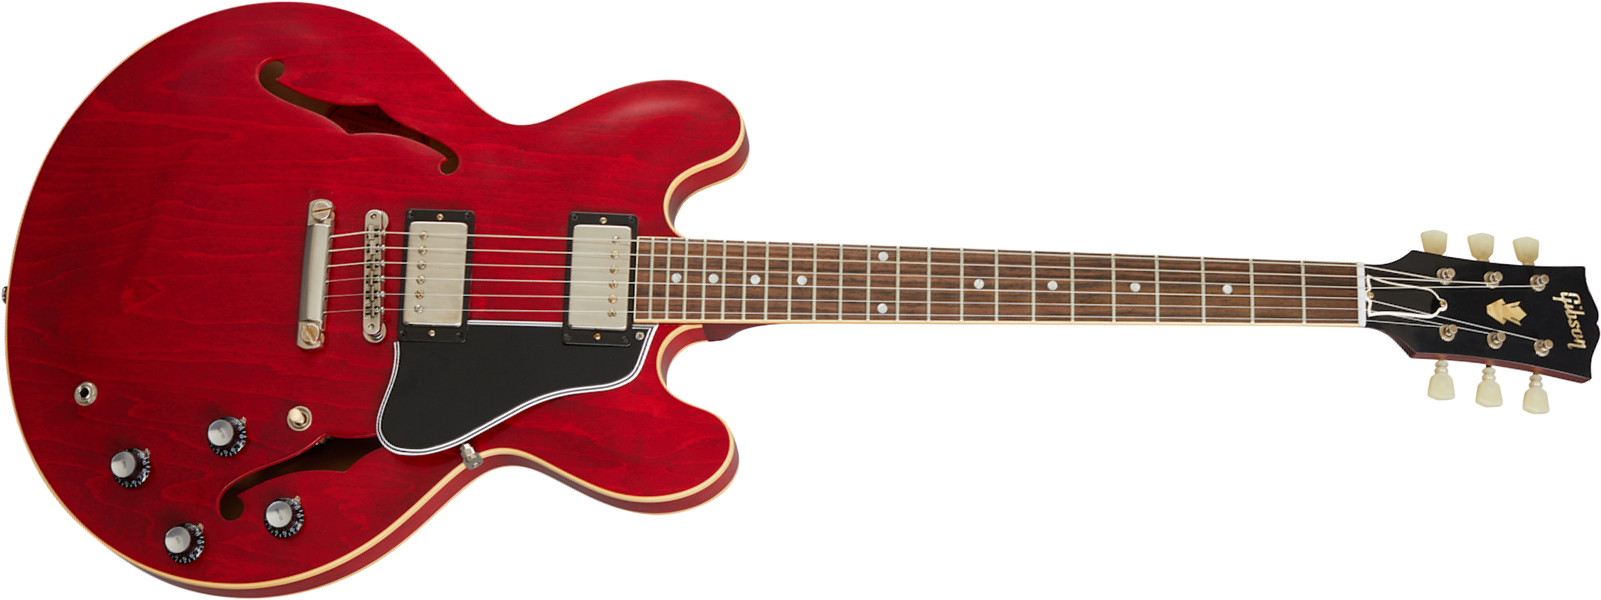 Gibson Custom Shop Historic Es335 Reissue 1961 2h Ht Rw - Vos Sixties Cherry - Semi-hollow electric guitar - Main picture